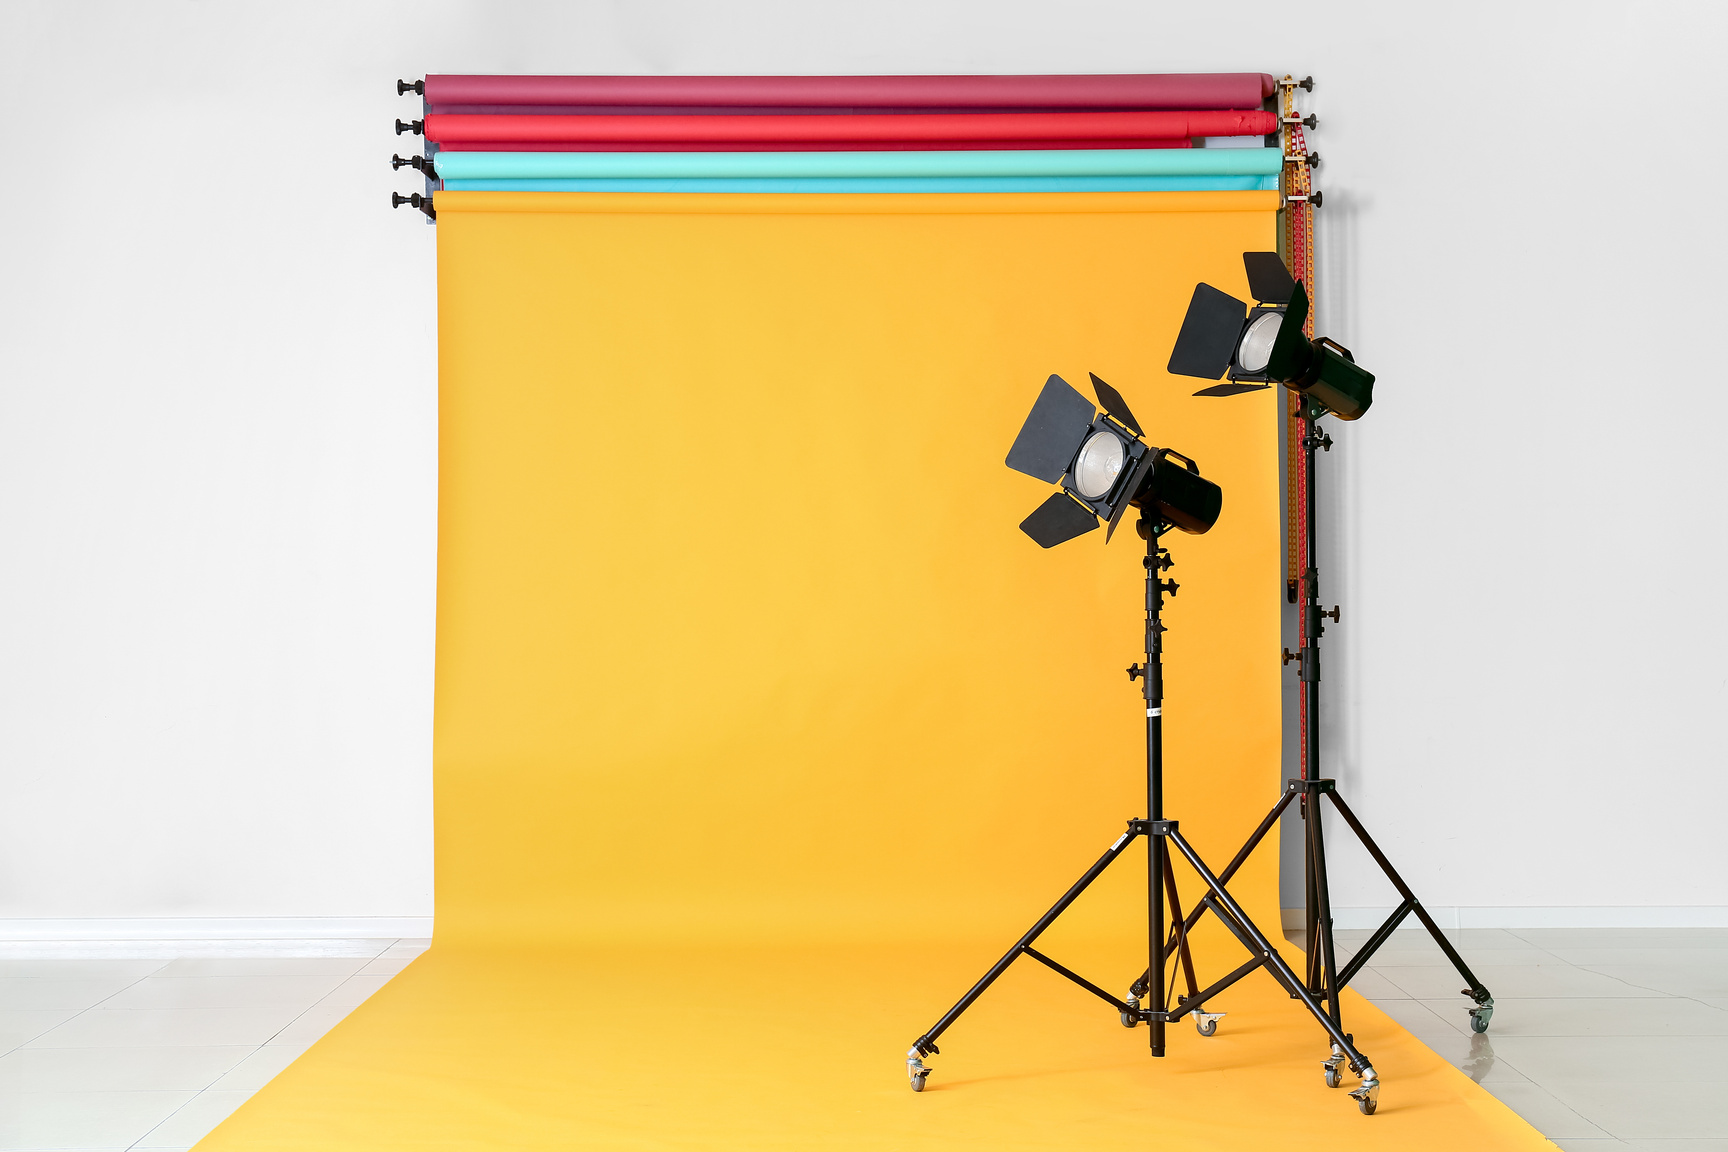 Different Backdrops and Equipment in Photo Studio